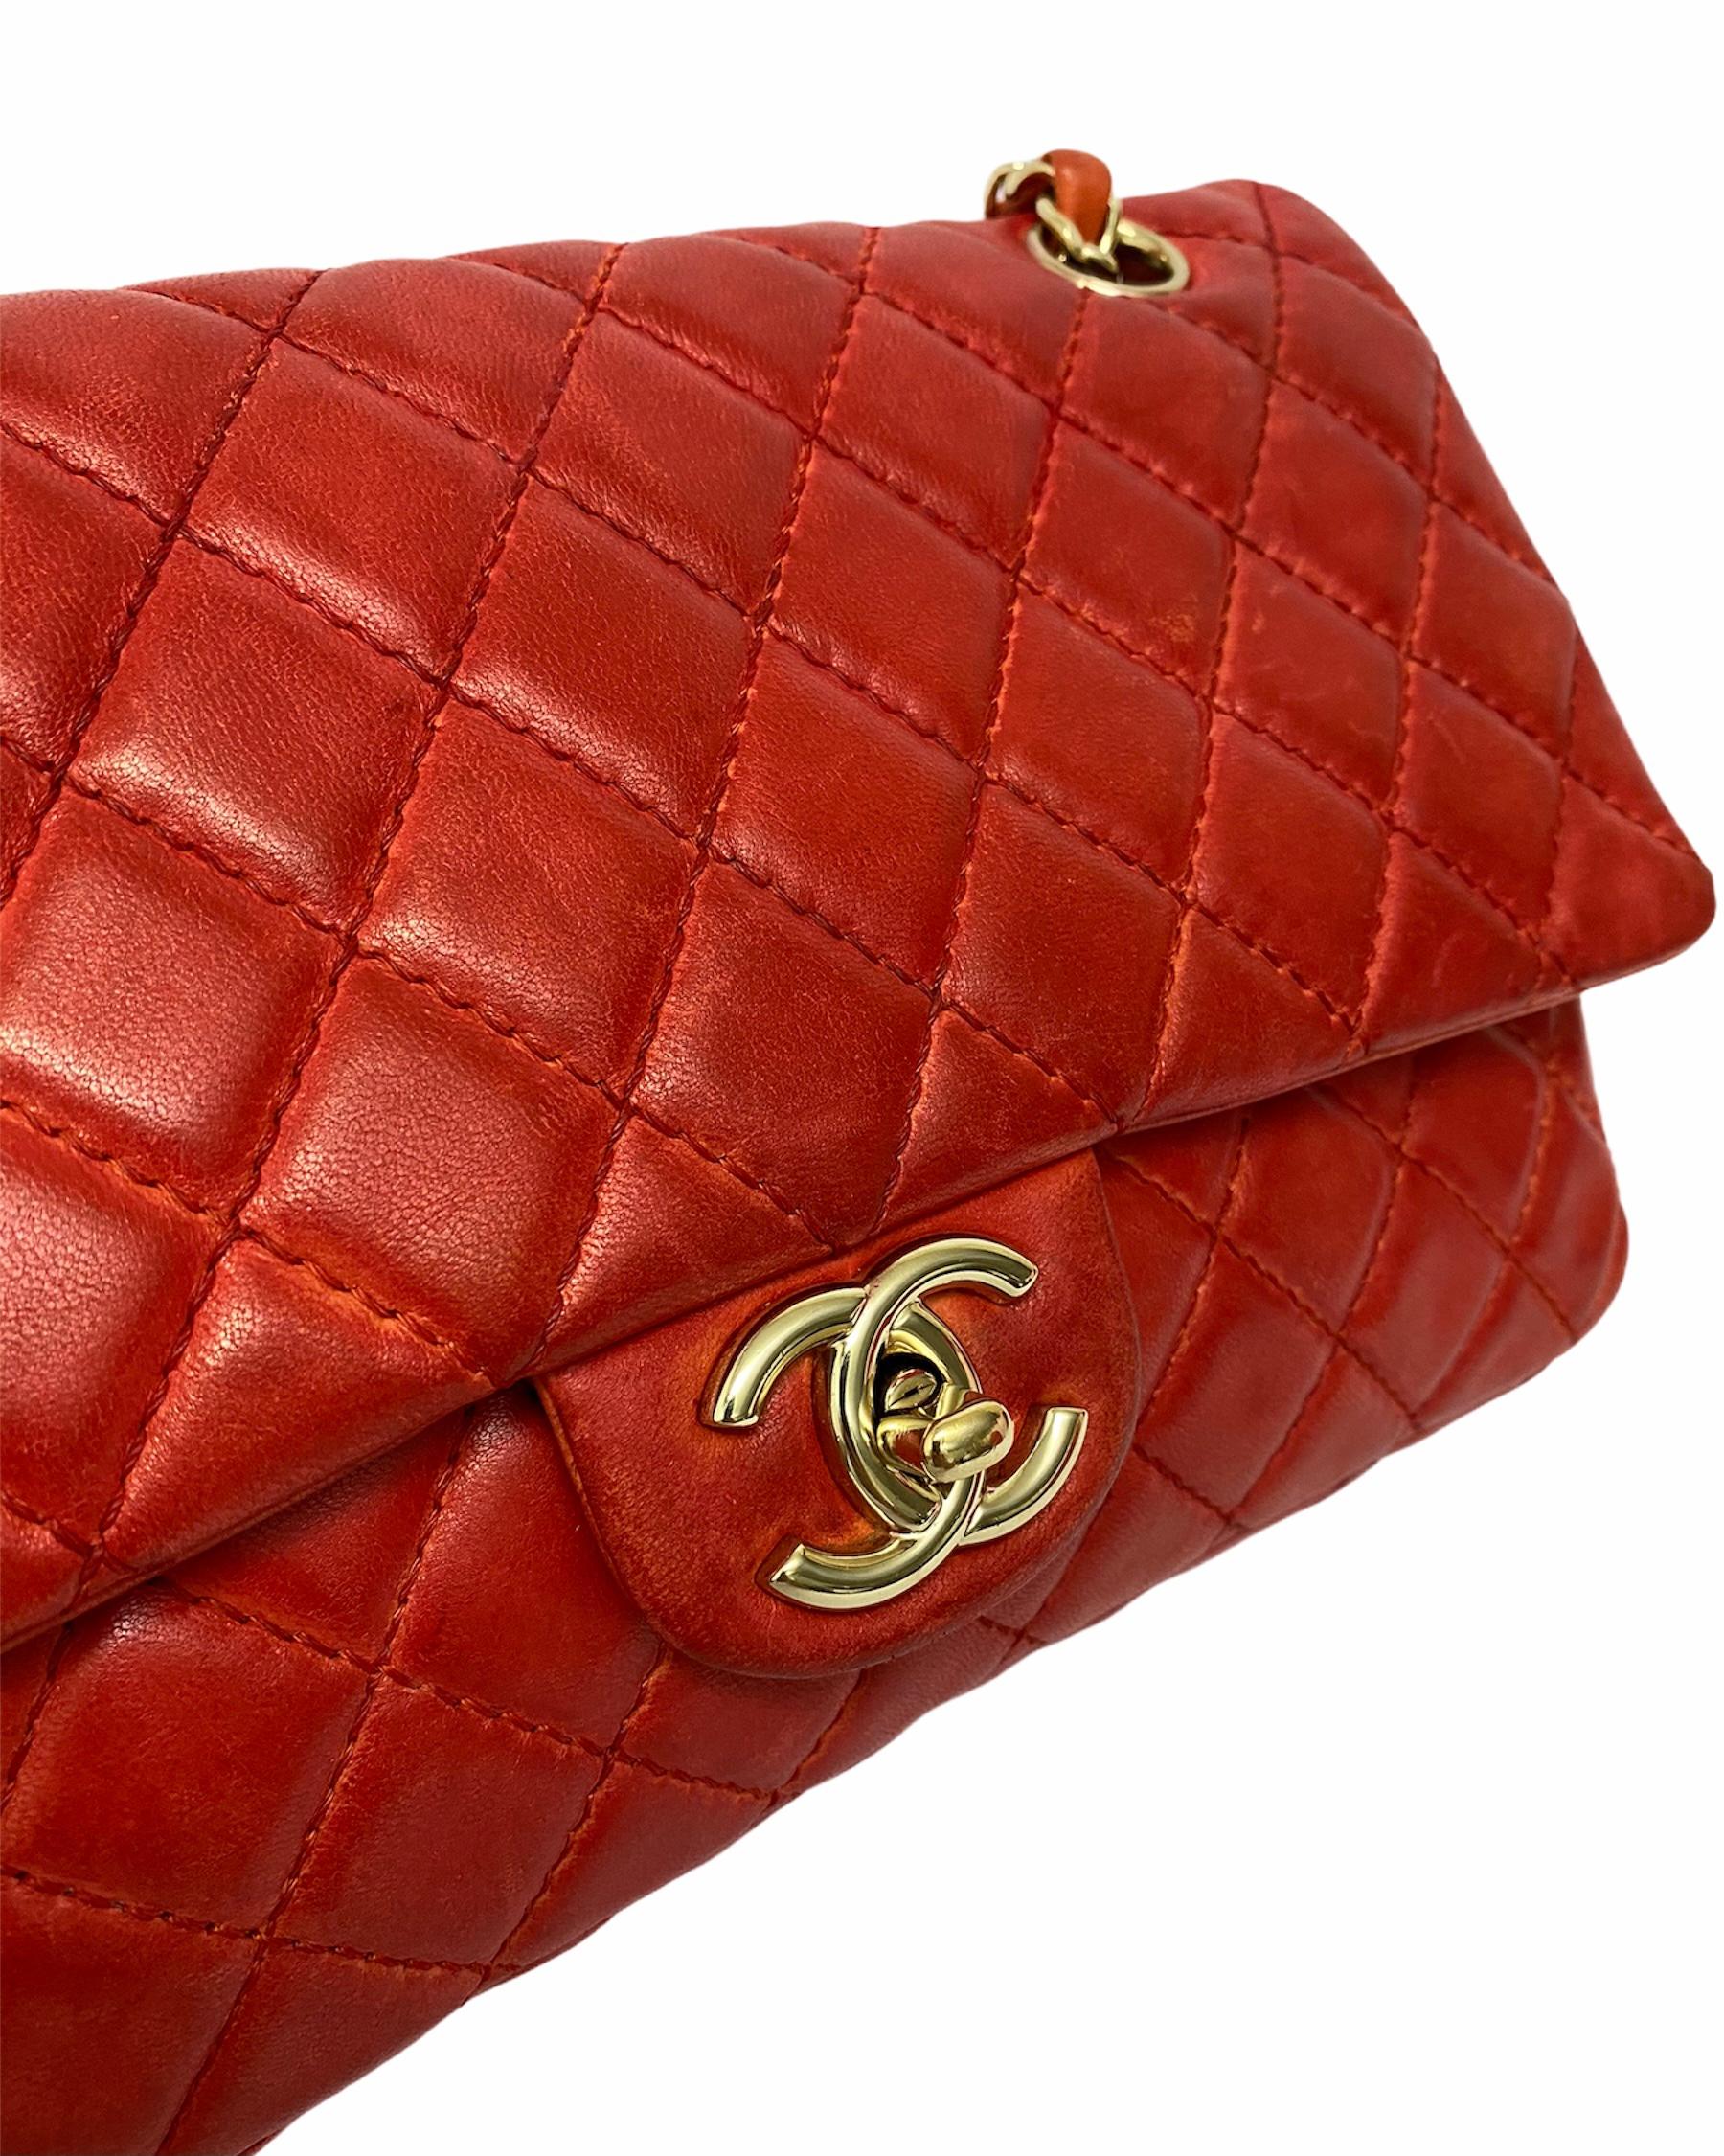 Chanel 2.55 Red Leather with Golden Hardware 4